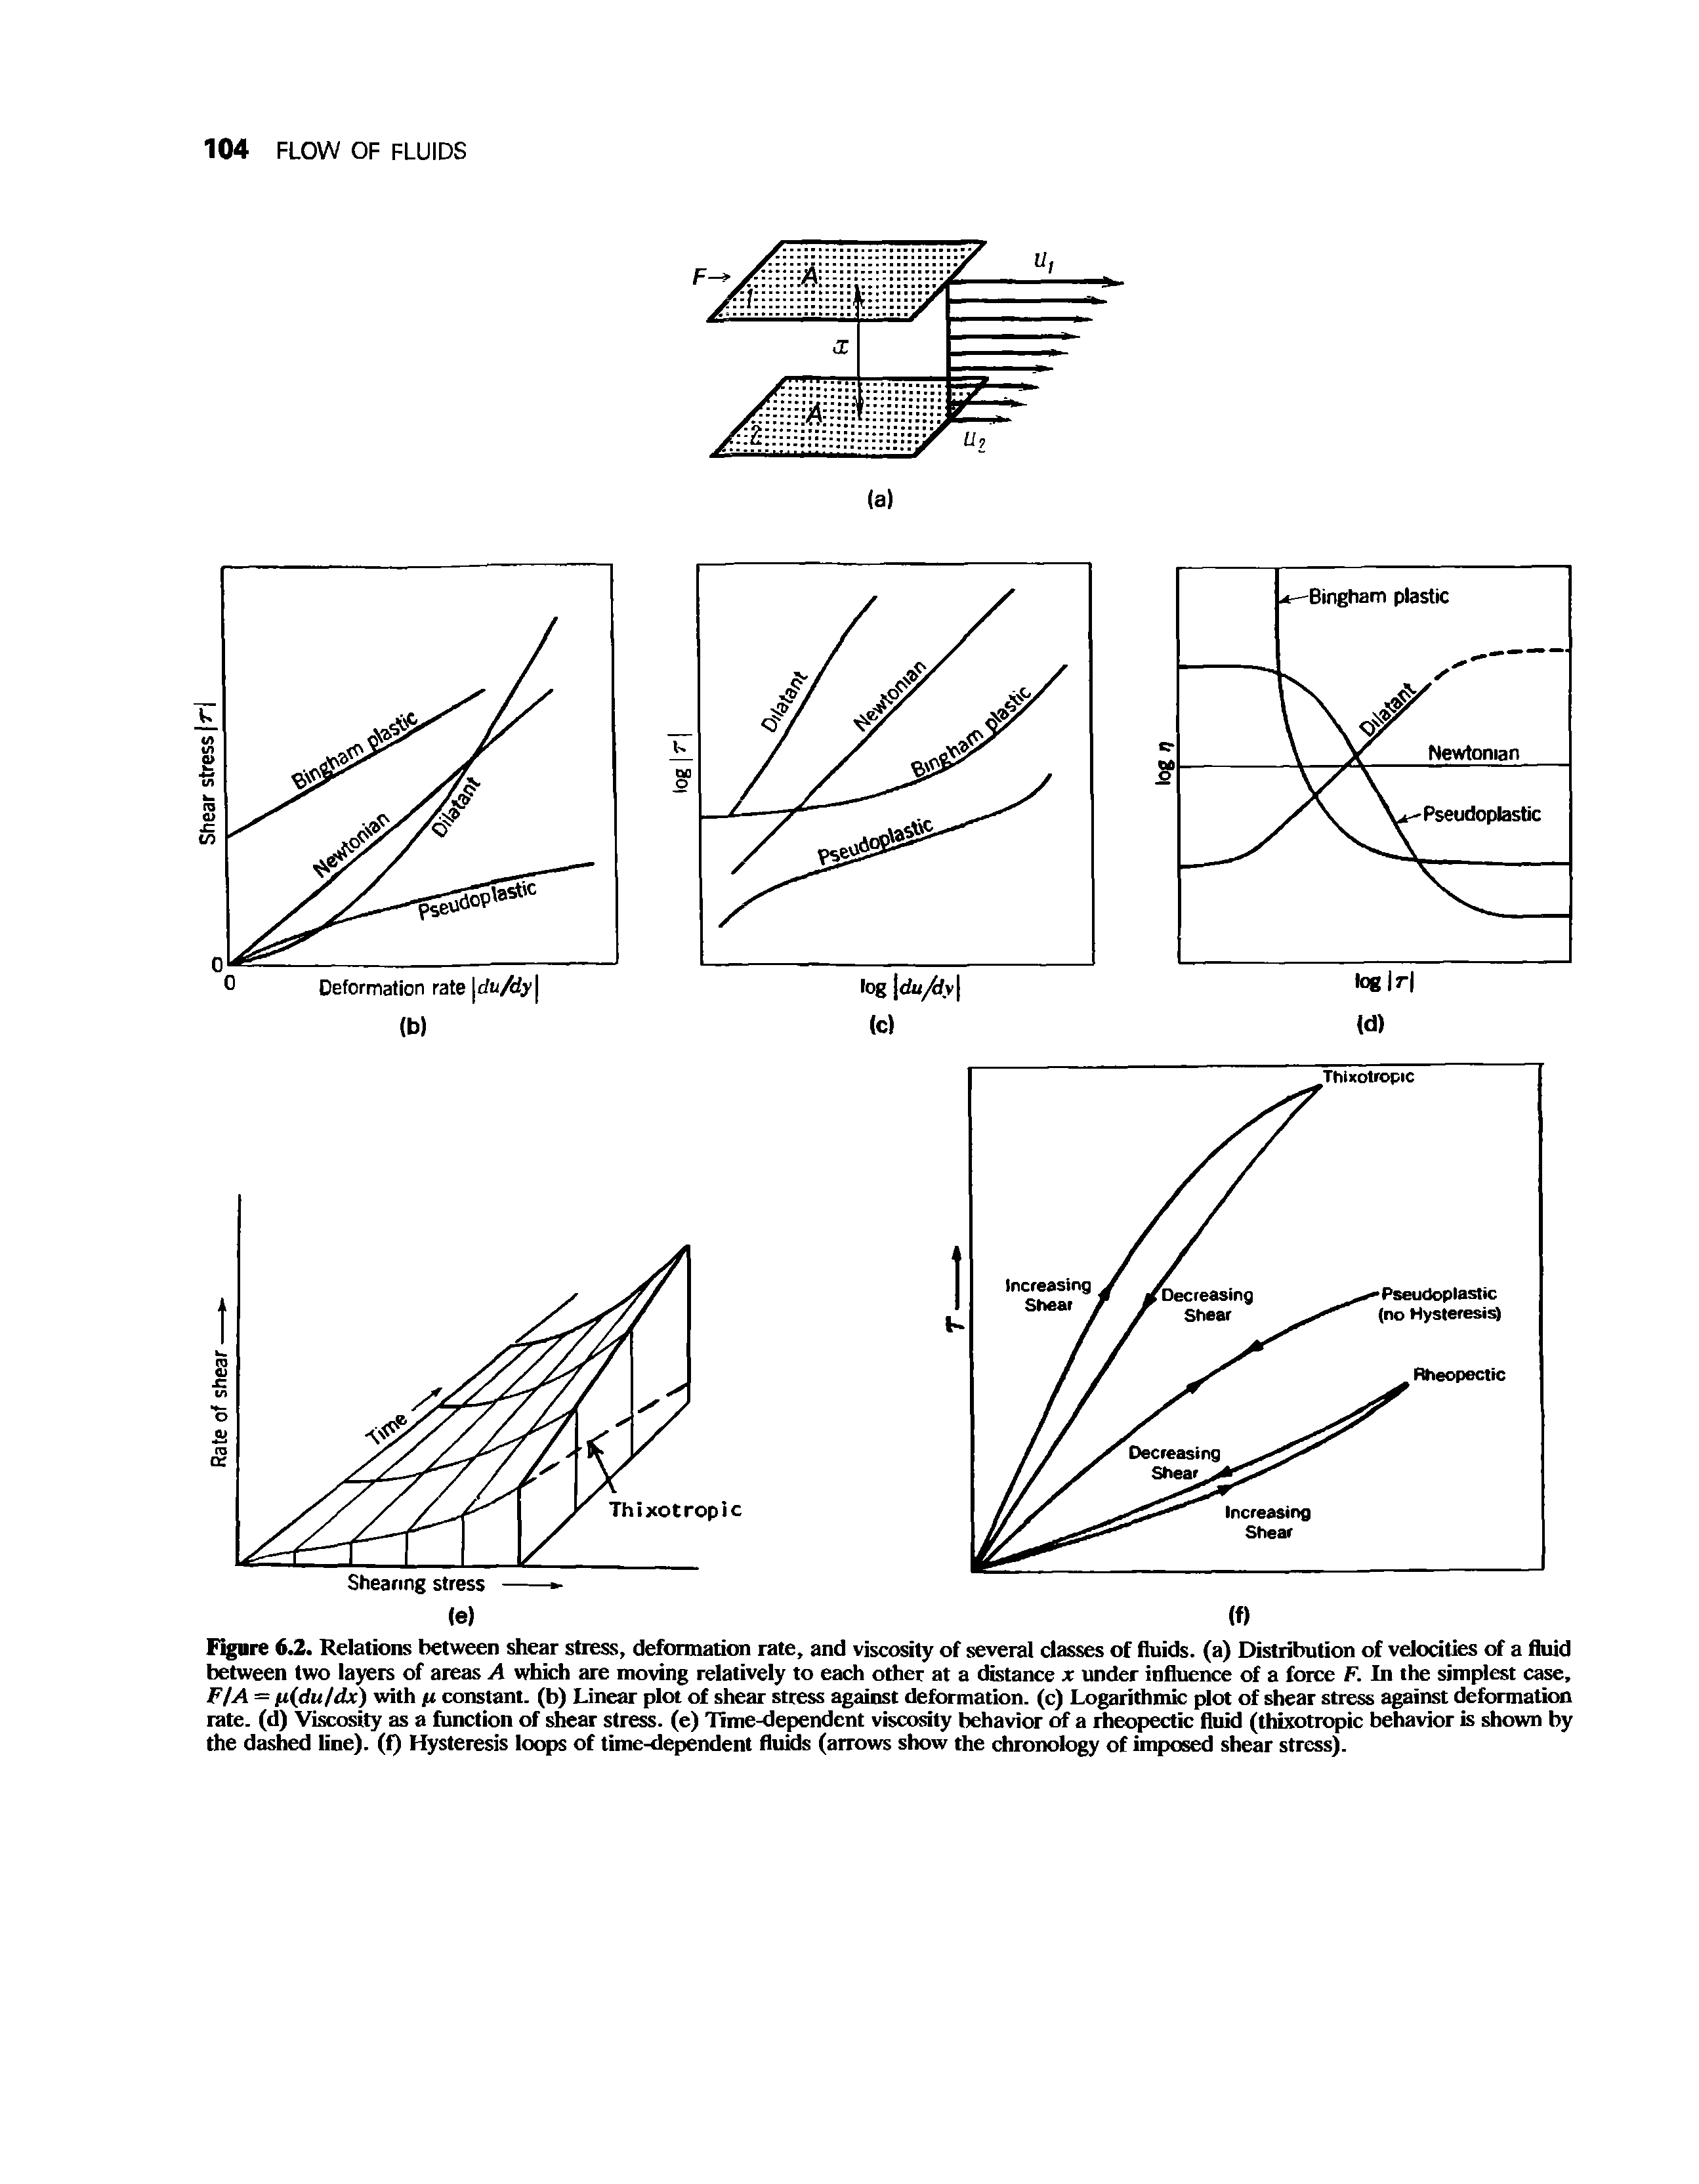 Figure 6.2. Relations between shear stress, deformation rate, and viscosity of several classes of fluids, (a) Distribution of velocities of a fluid between two layers of areas A which are moving relatively to each other at a distance x wider influence of a force F. In the simplest case, F/A = fi(du/dx) with ju constant, (b) Linear plot of shear stress against deformation, (c) Logarithmic plot of shear stress against deformation rate, (d) Viscosity as a function of shear stress, (e) Time-dependent viscosity behavior of a rheopectic fluid (thixotropic behavior is shown by the dashed line). (1) Hysteresis loops of time-dependent fluids (arrows show the chronology of imposed shear stress).